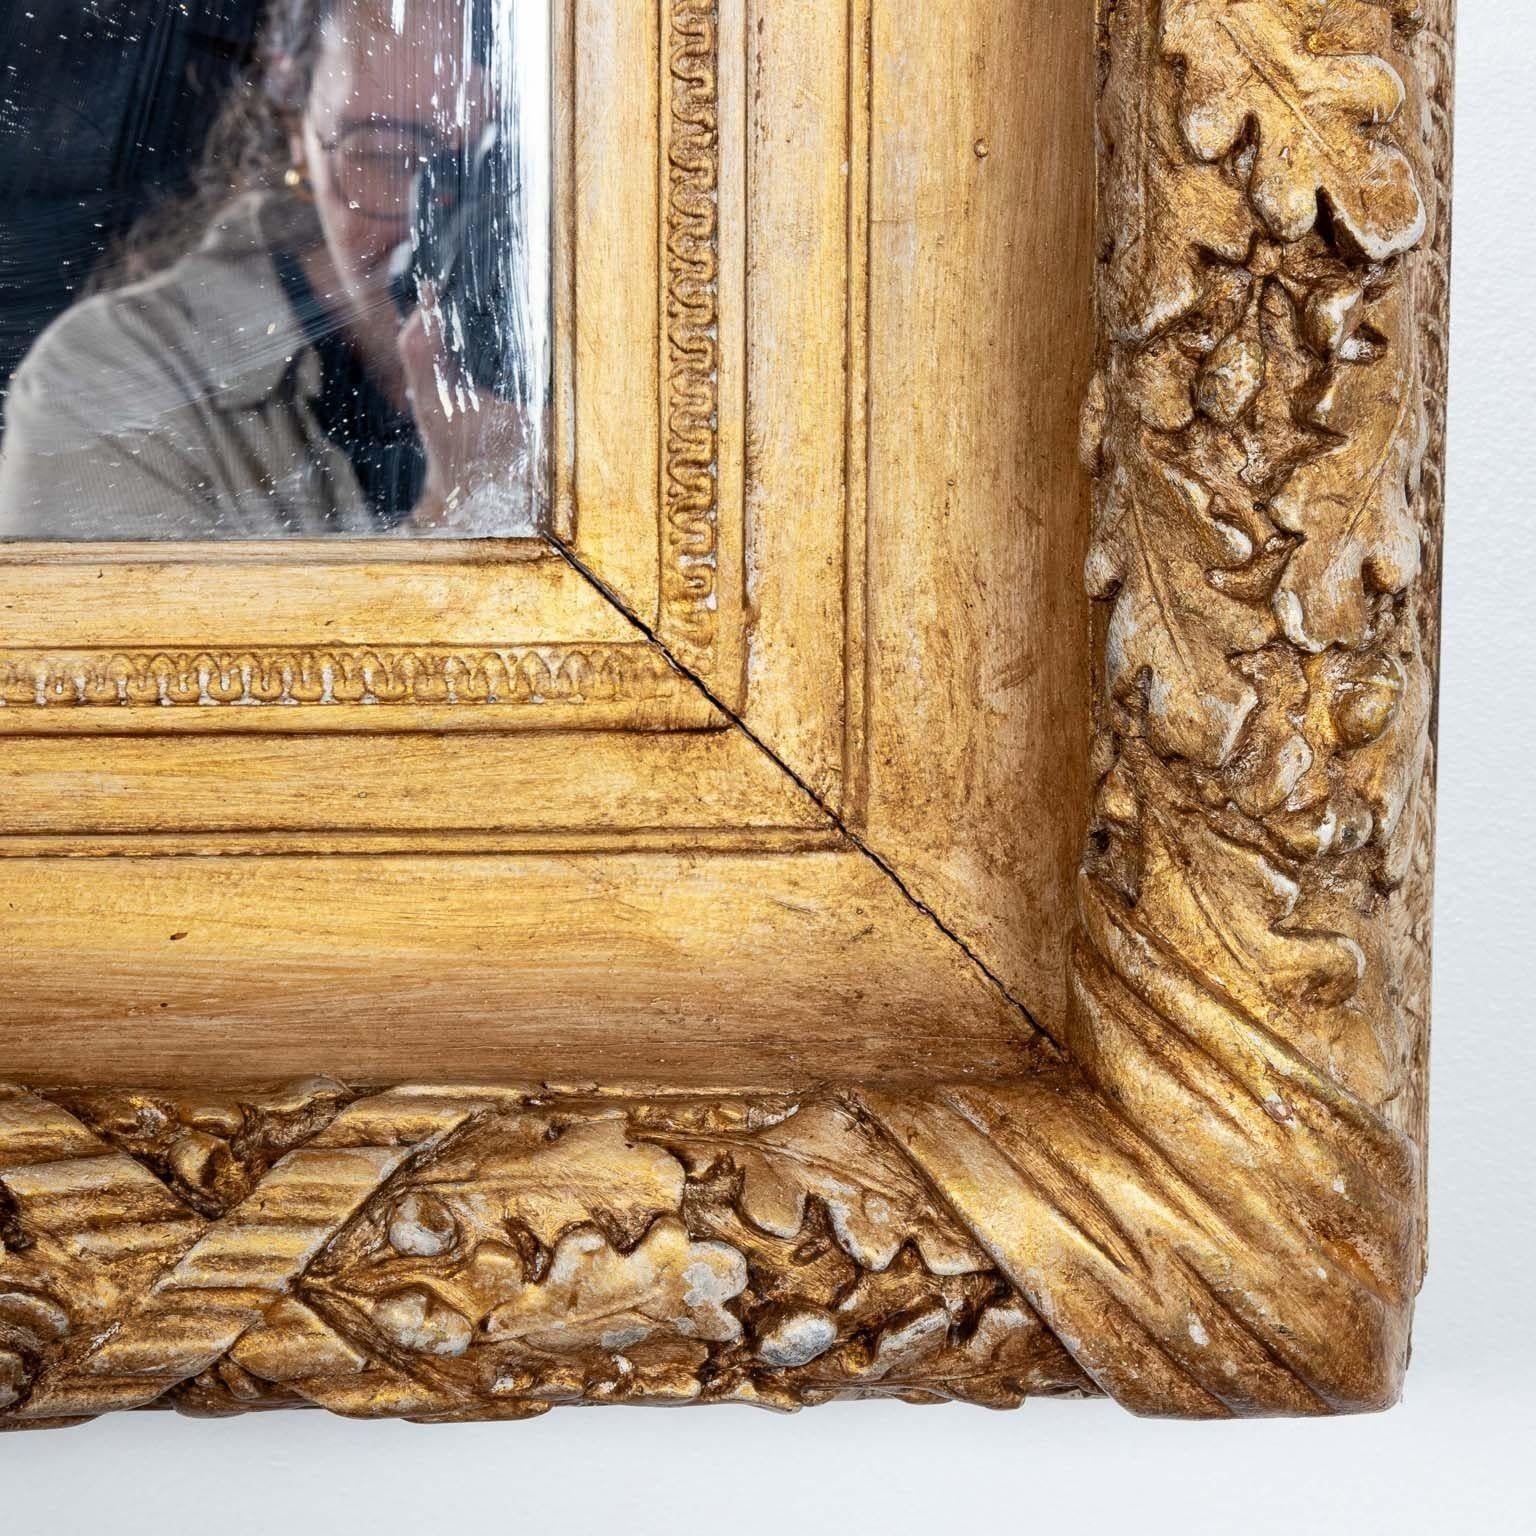 A generously sized English mirror with a gilt gesso frame. Crafted in the early 20th century, this mirror bears the hallmark of English craftsmanship at its finest. The frame, adorned with a repeating oak leaf pattern, dances with elegance and